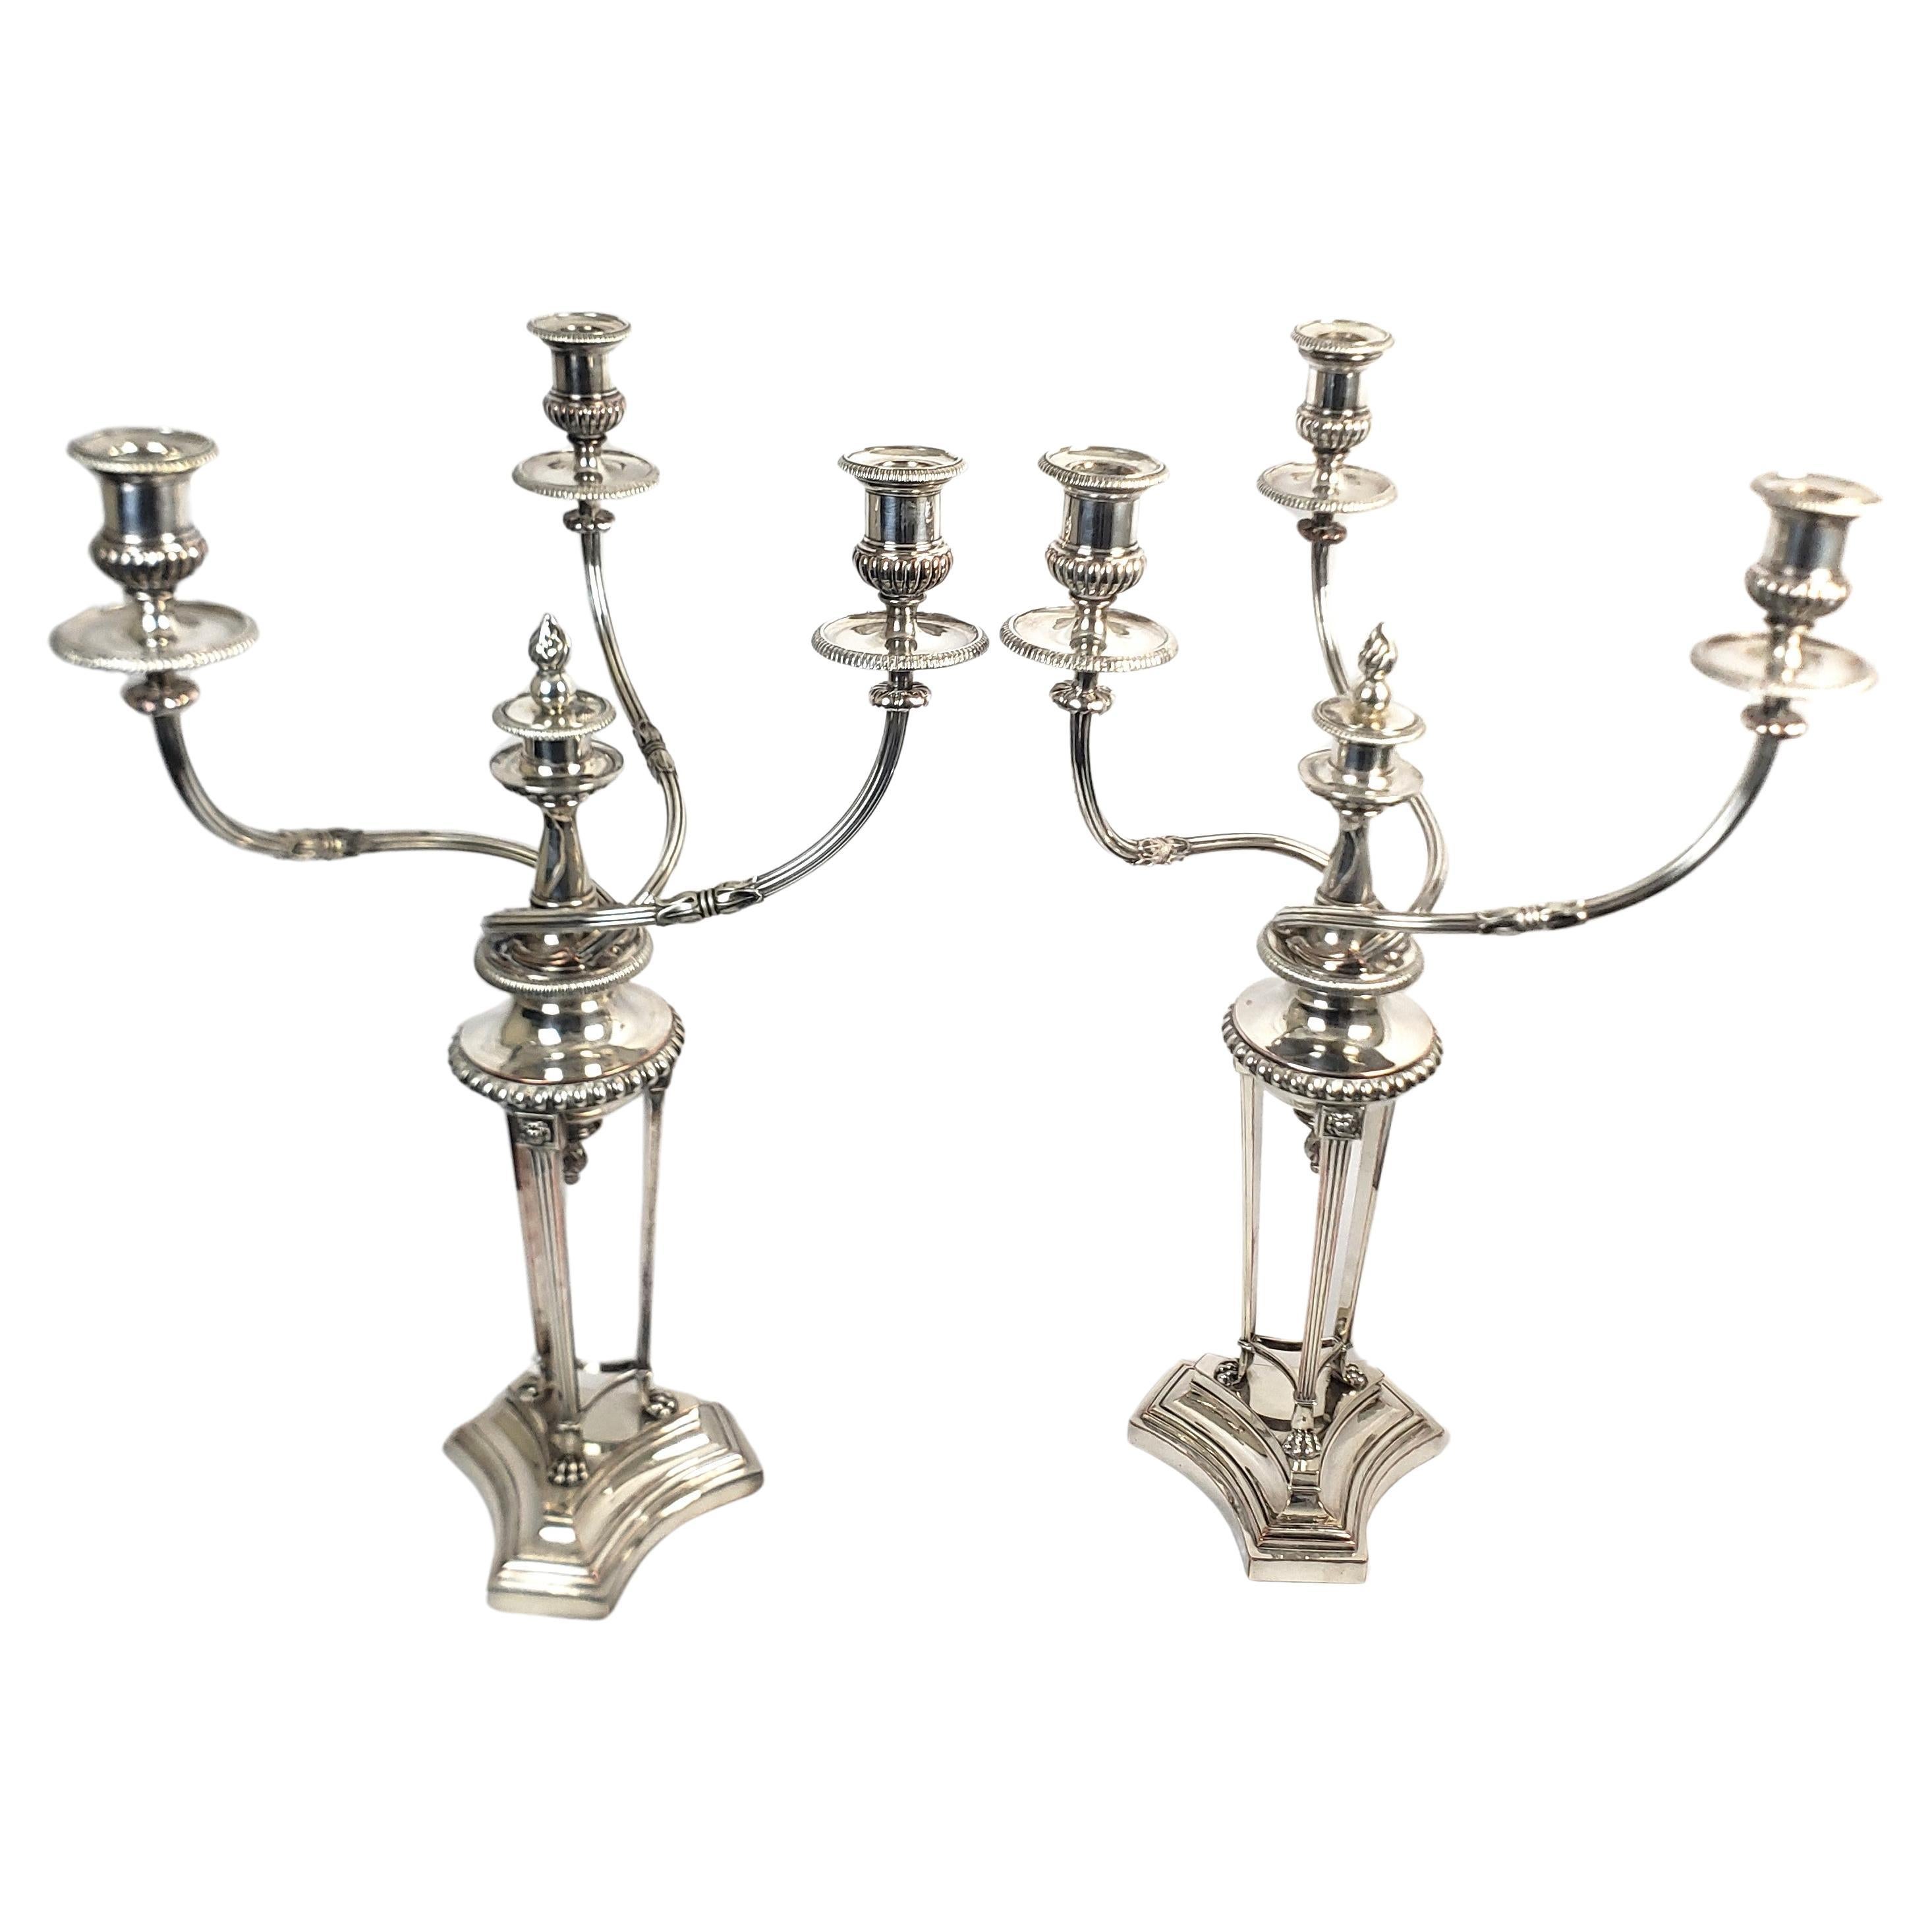 Pair of Huge Antique Matthew Boulton Regency Three Arm Silver Plated Candelabras For Sale